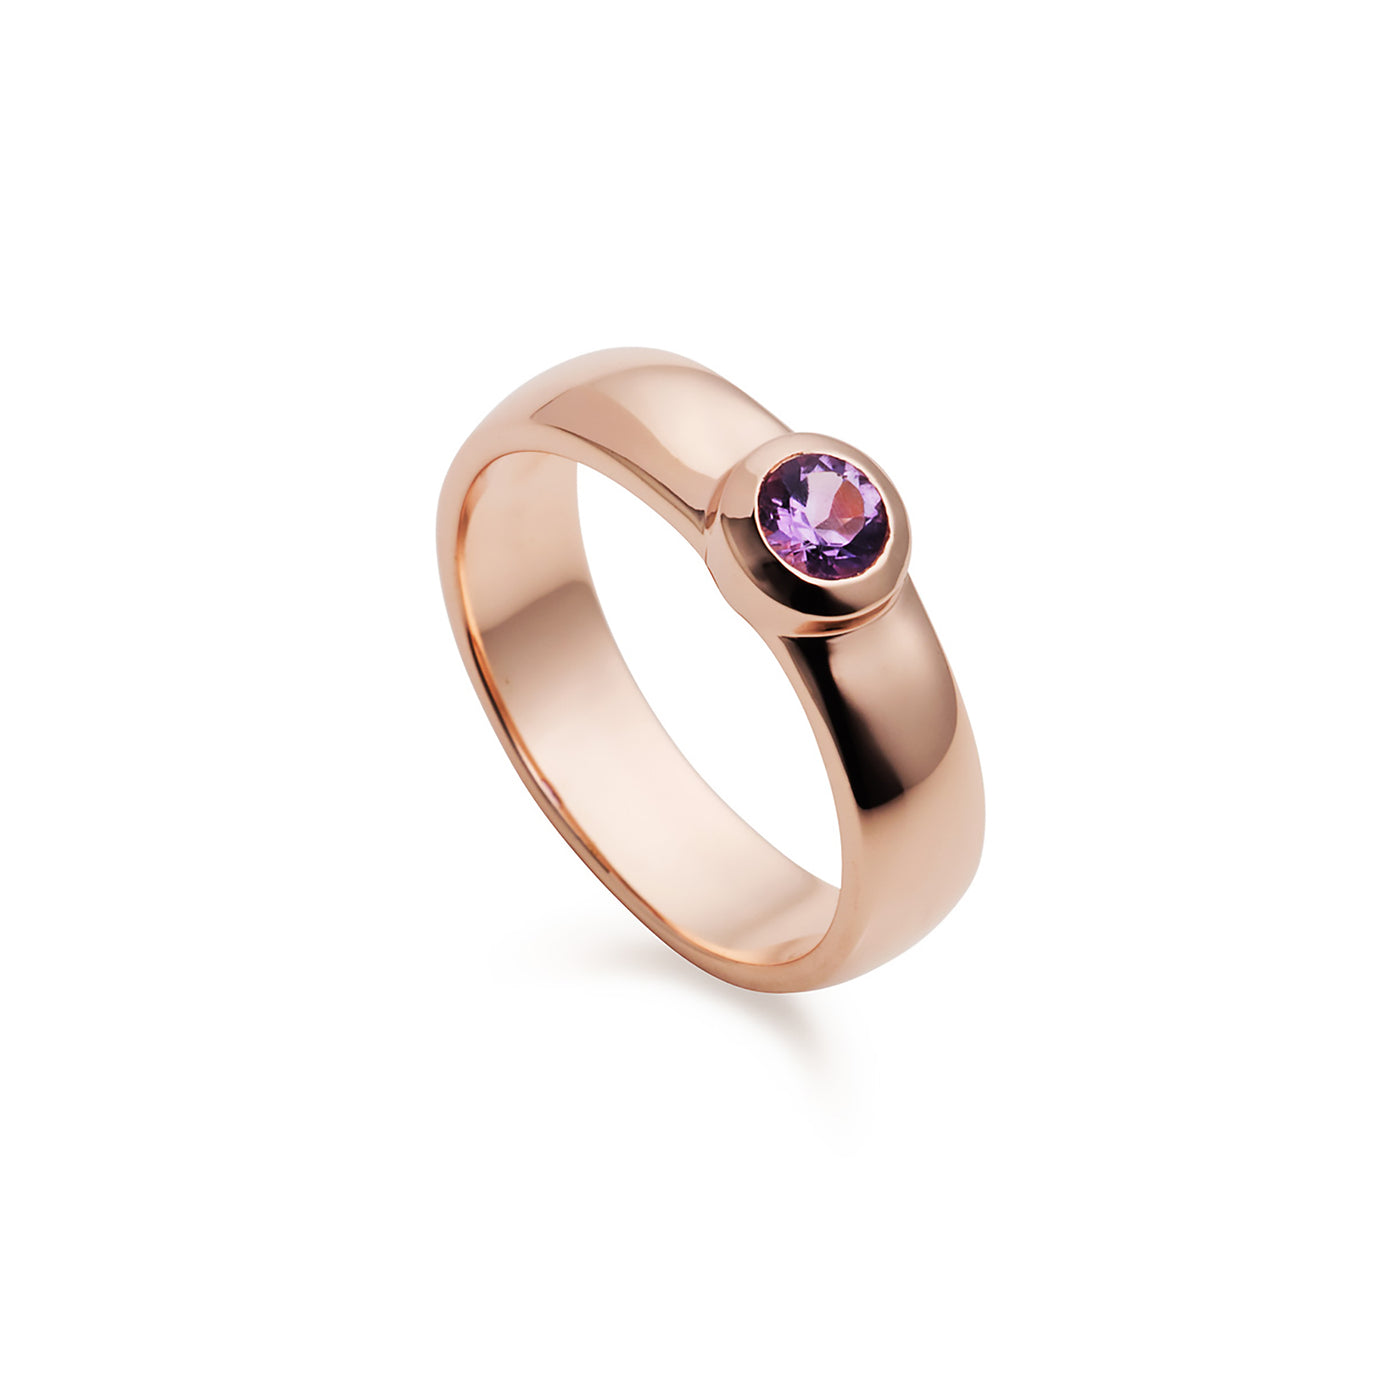 Photo of Rose Gold Vermeil Ring With Amethyst Stone